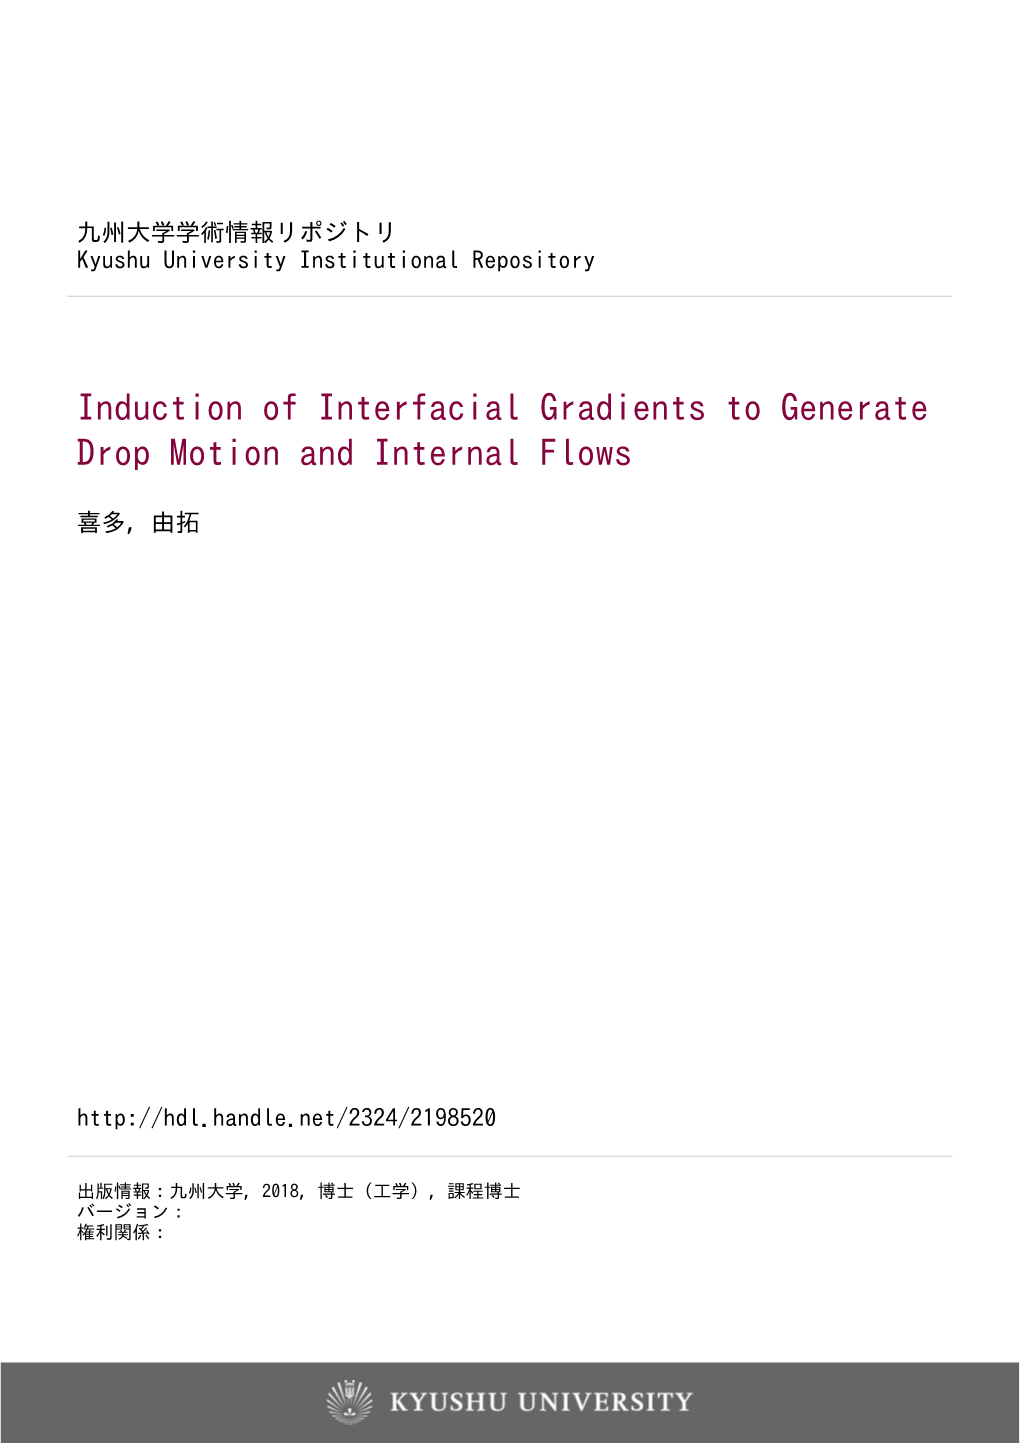 Induction of Interfacial Gradients to Generate Drop Motion and Internal Flows